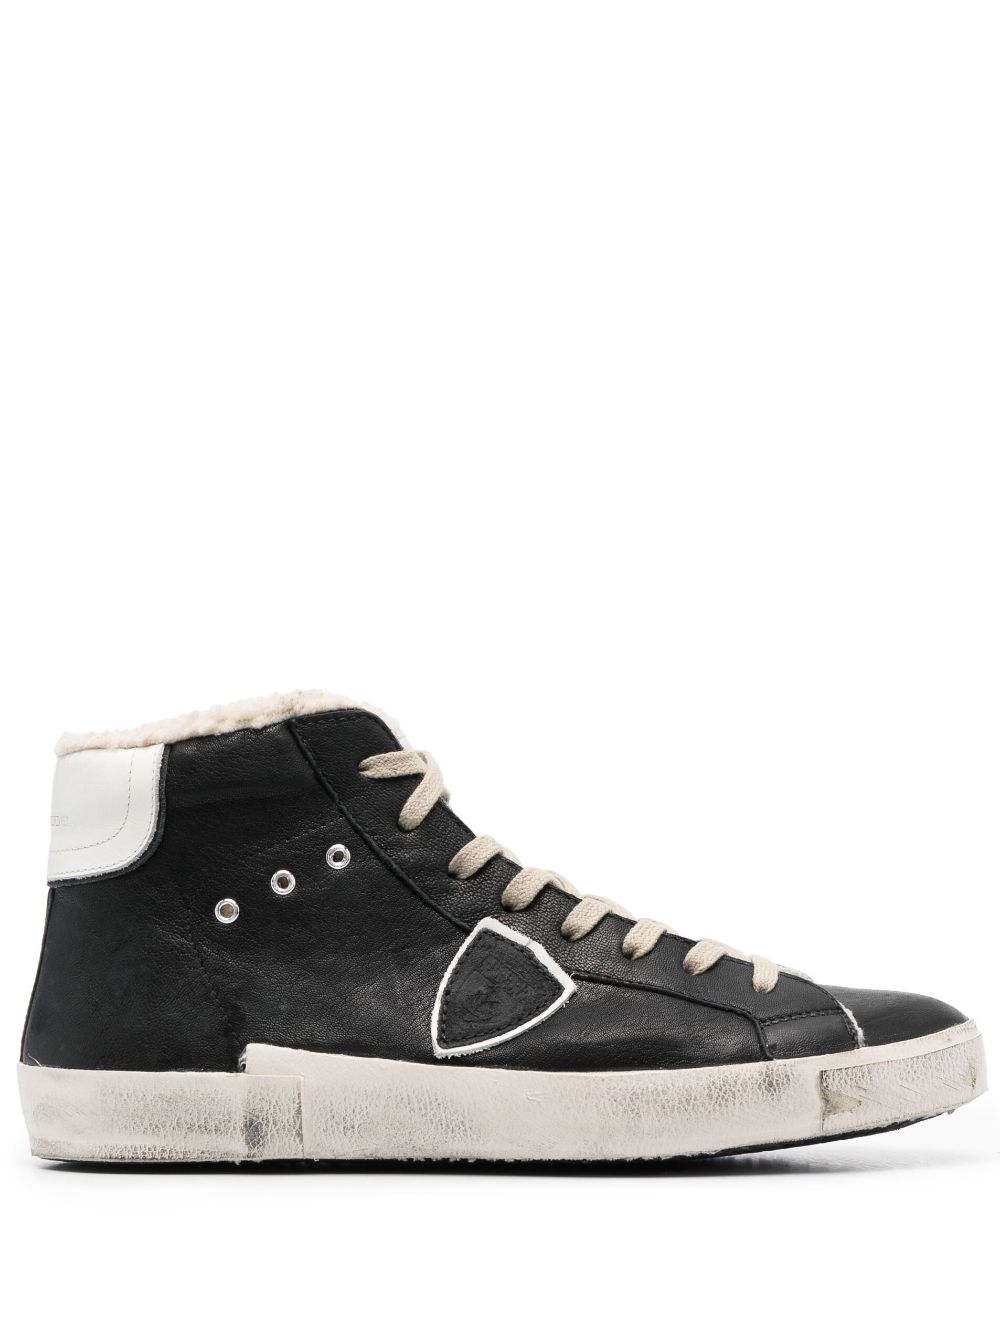 Philippe Model Paris logo-patch Leather Sneakers - Farfetch